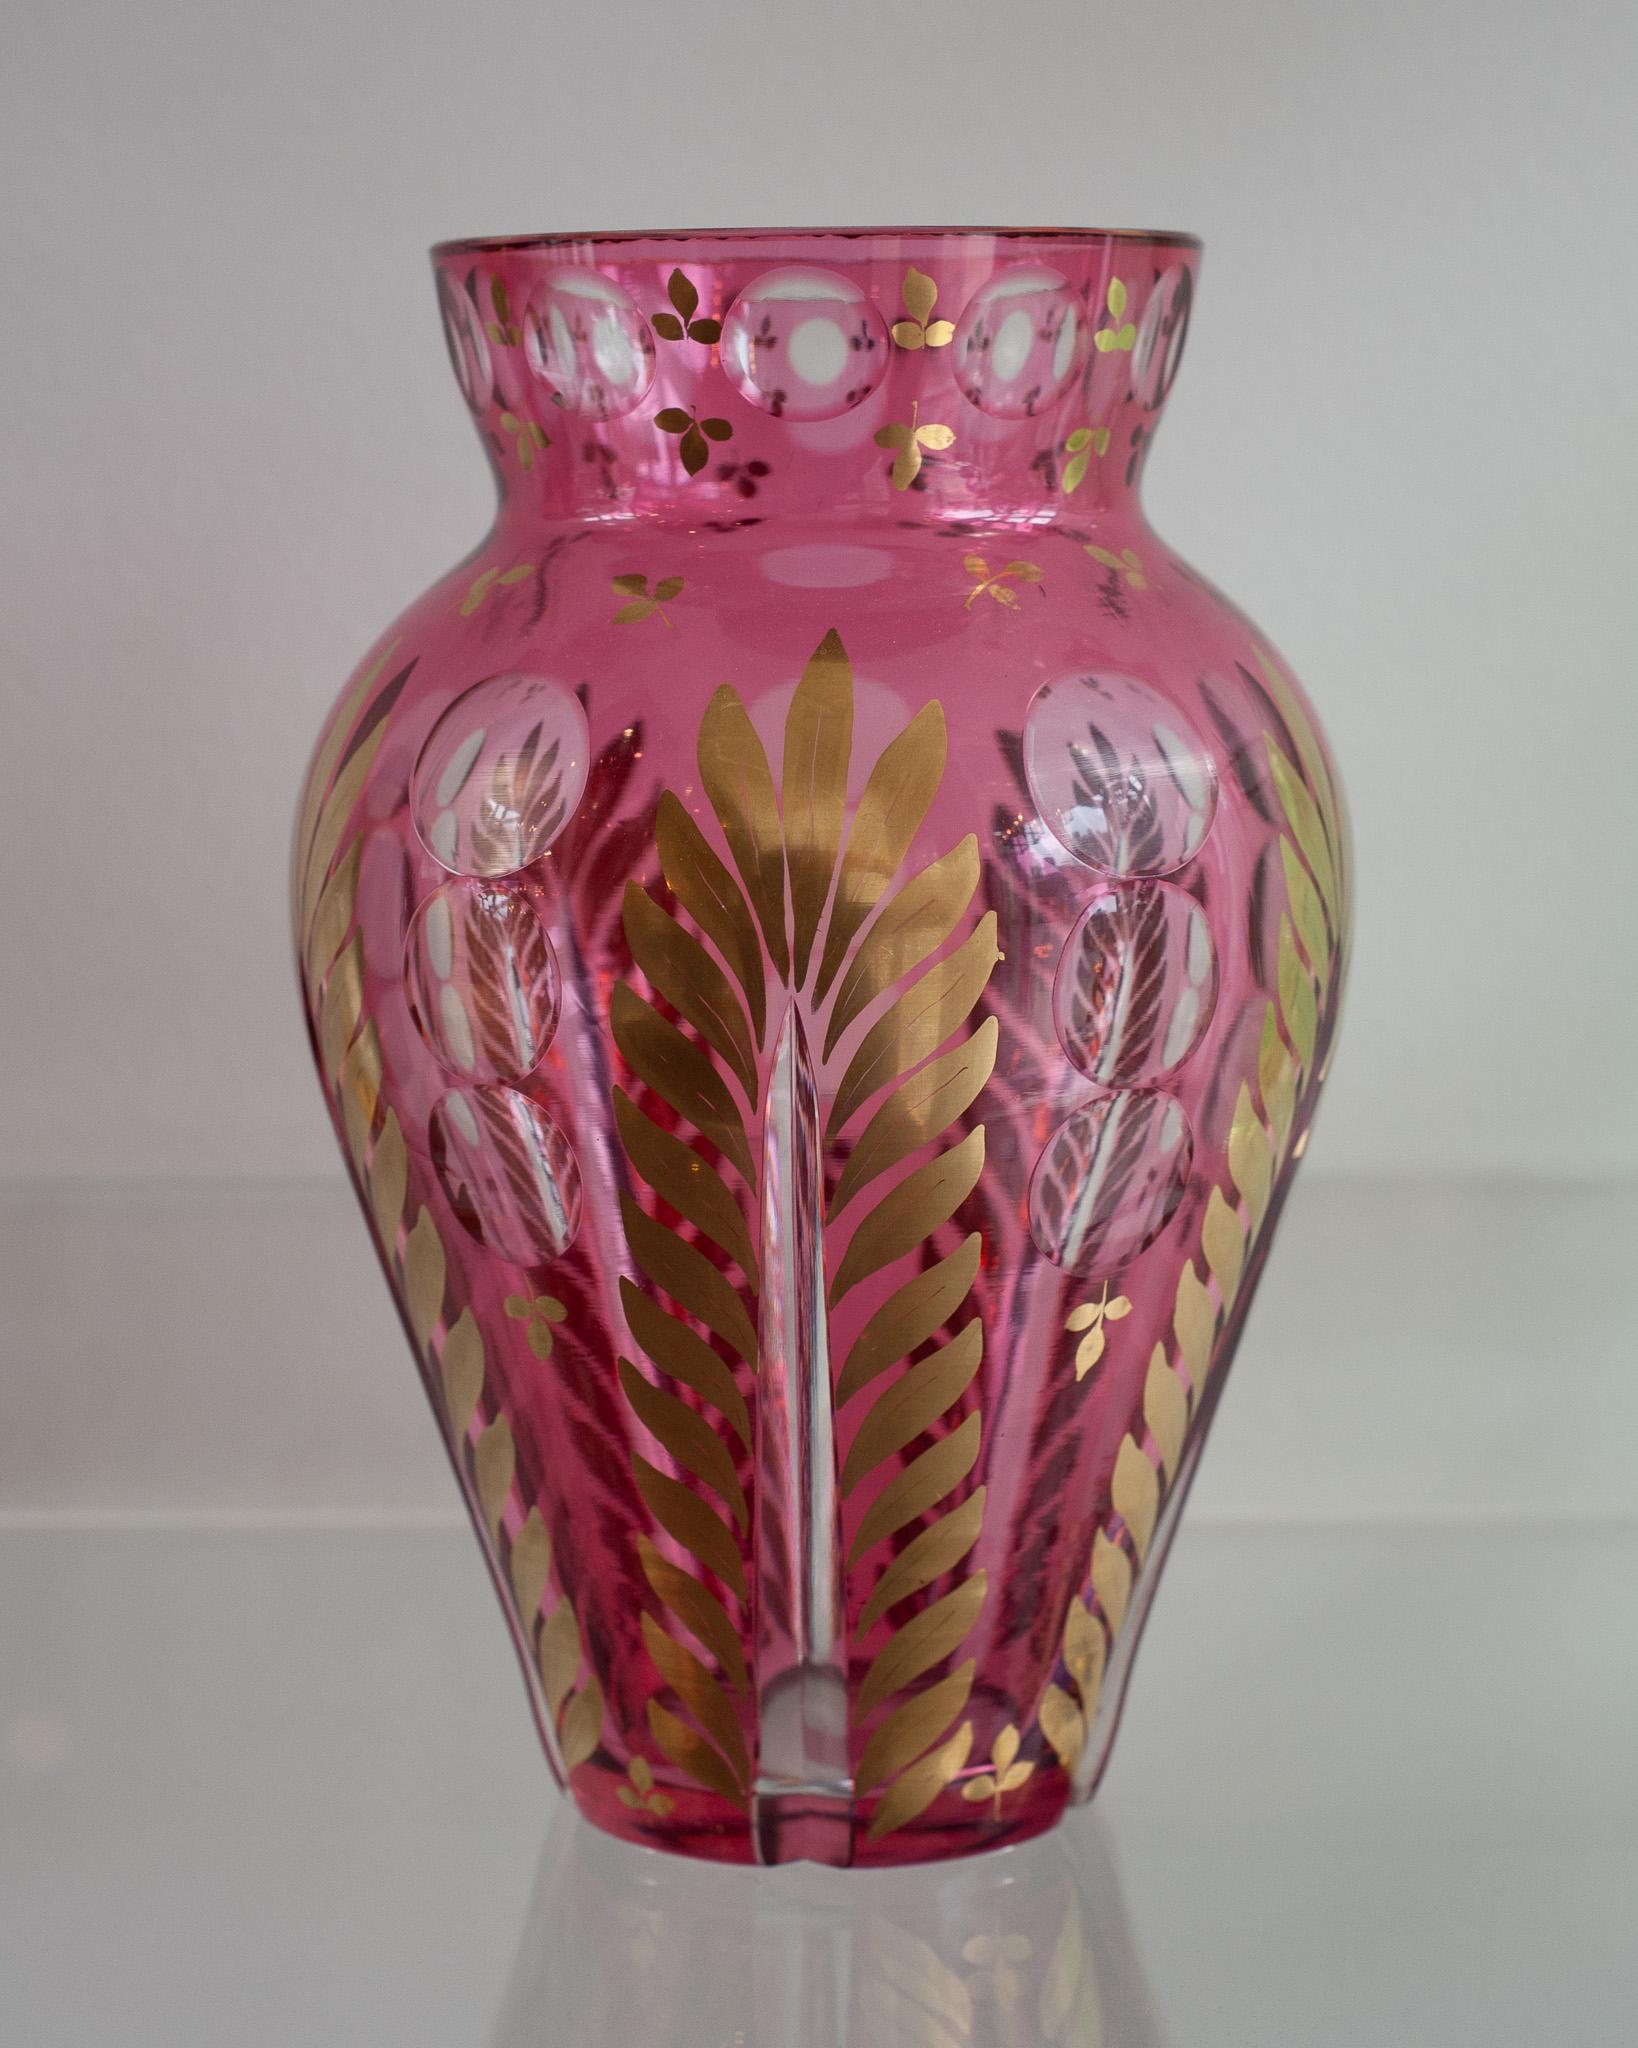 A beautiful antique bohemian cranberry glass vase with clear cut details and gold gilded leaf detail.